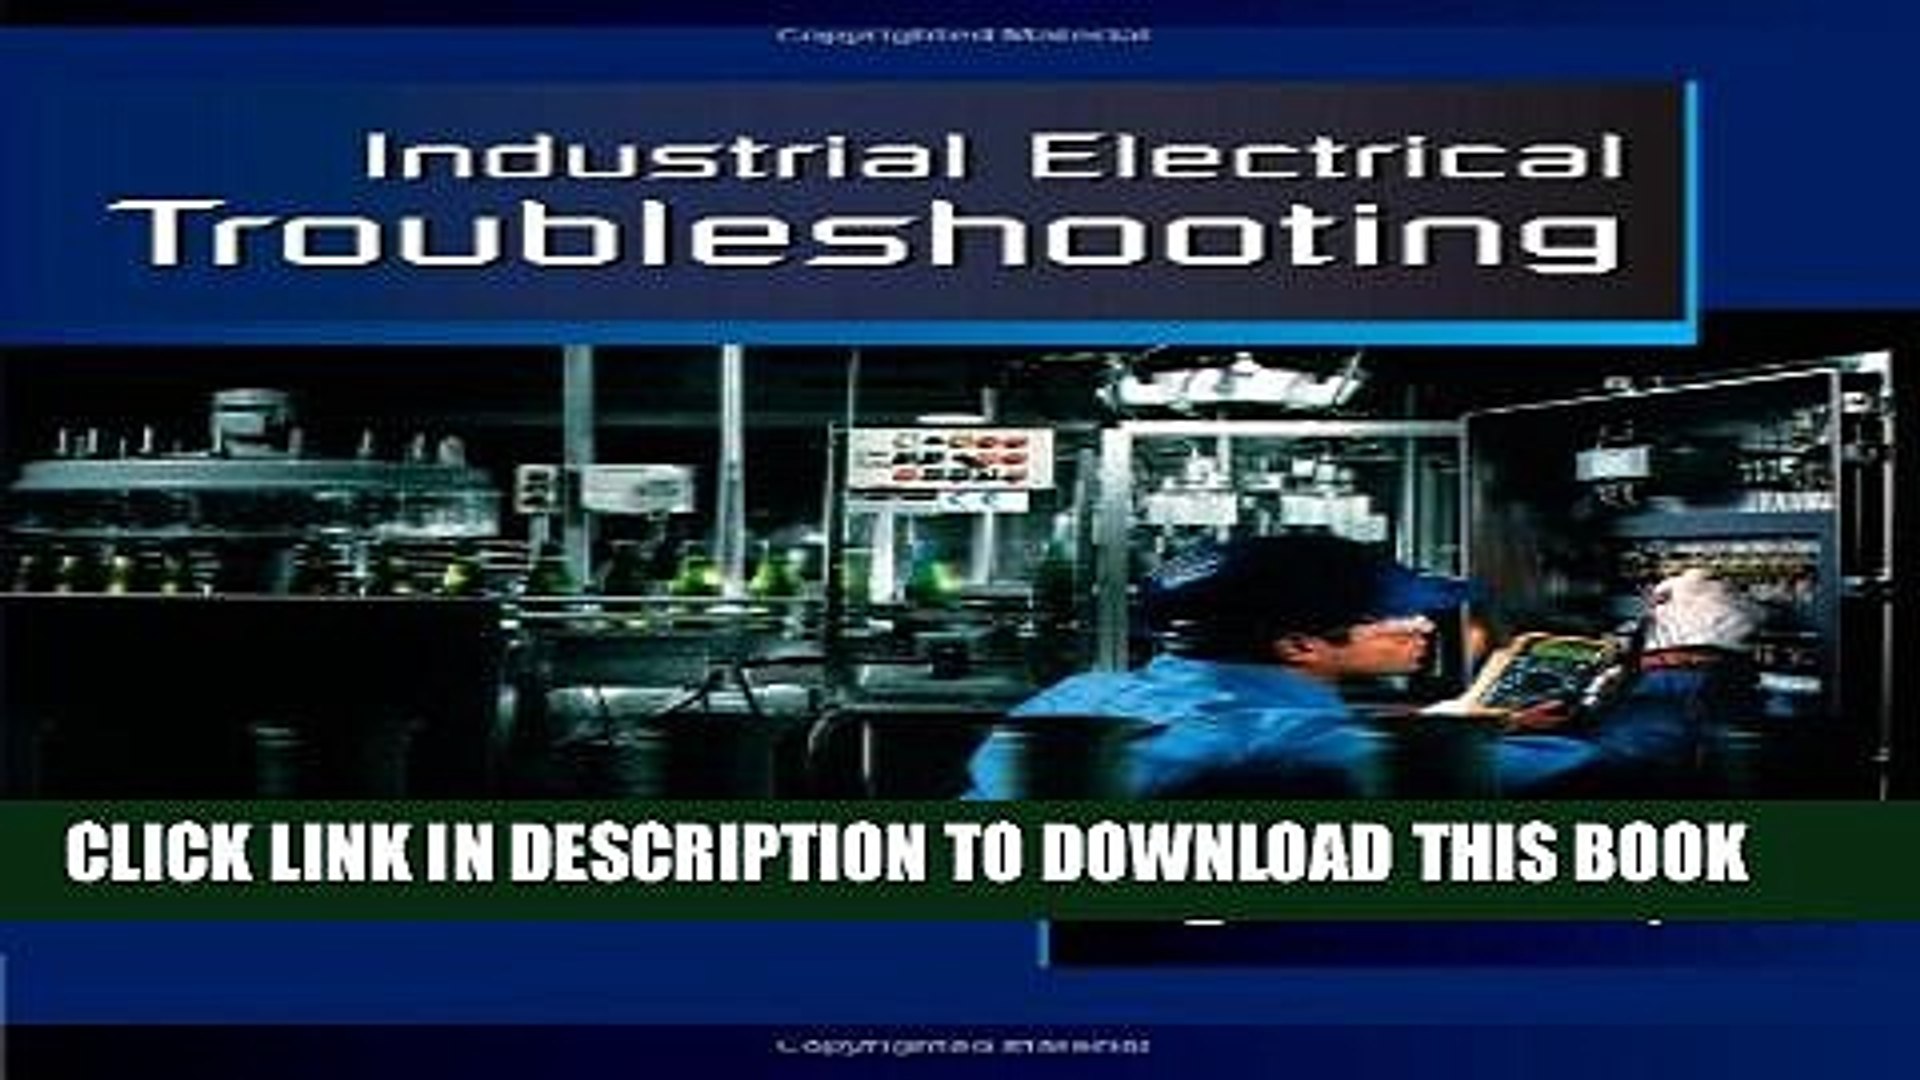 Industrial electrical troubleshooting training